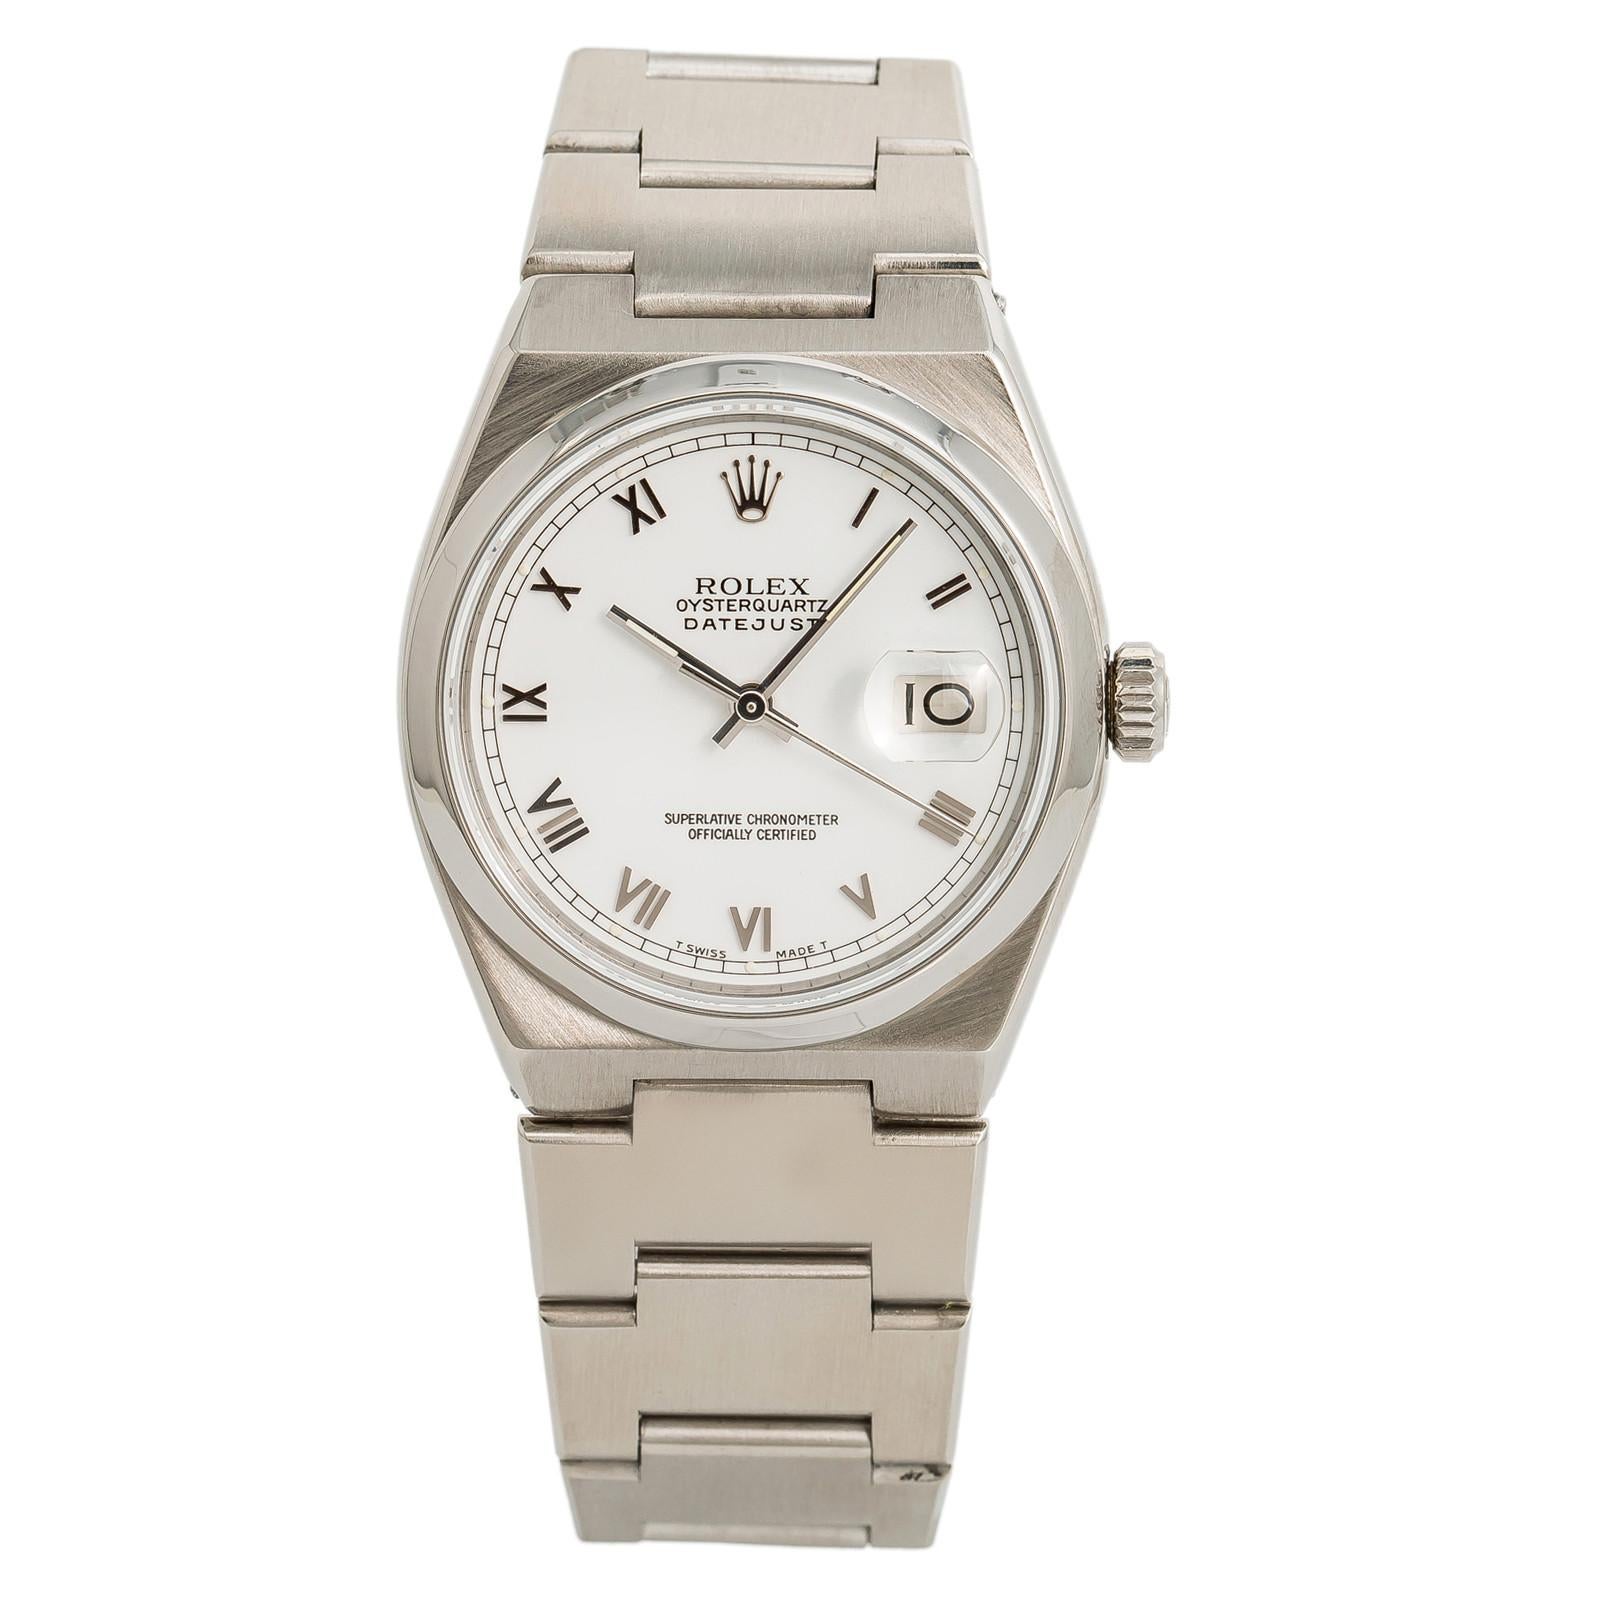 Rolex Oysterquartz 5154, Dial Certified Authentic For Sale